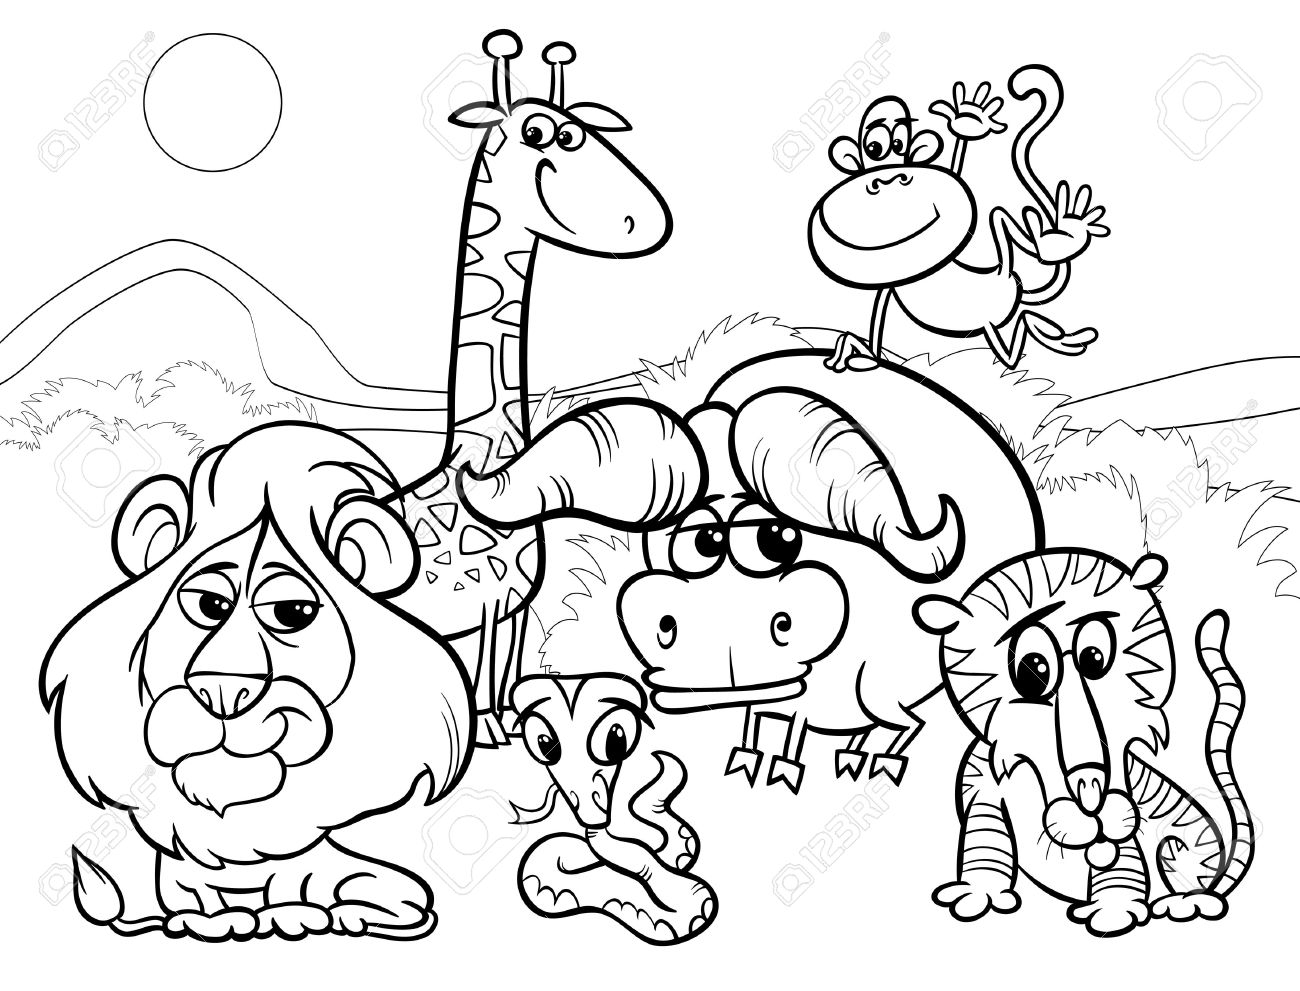 Animals clipart black and white